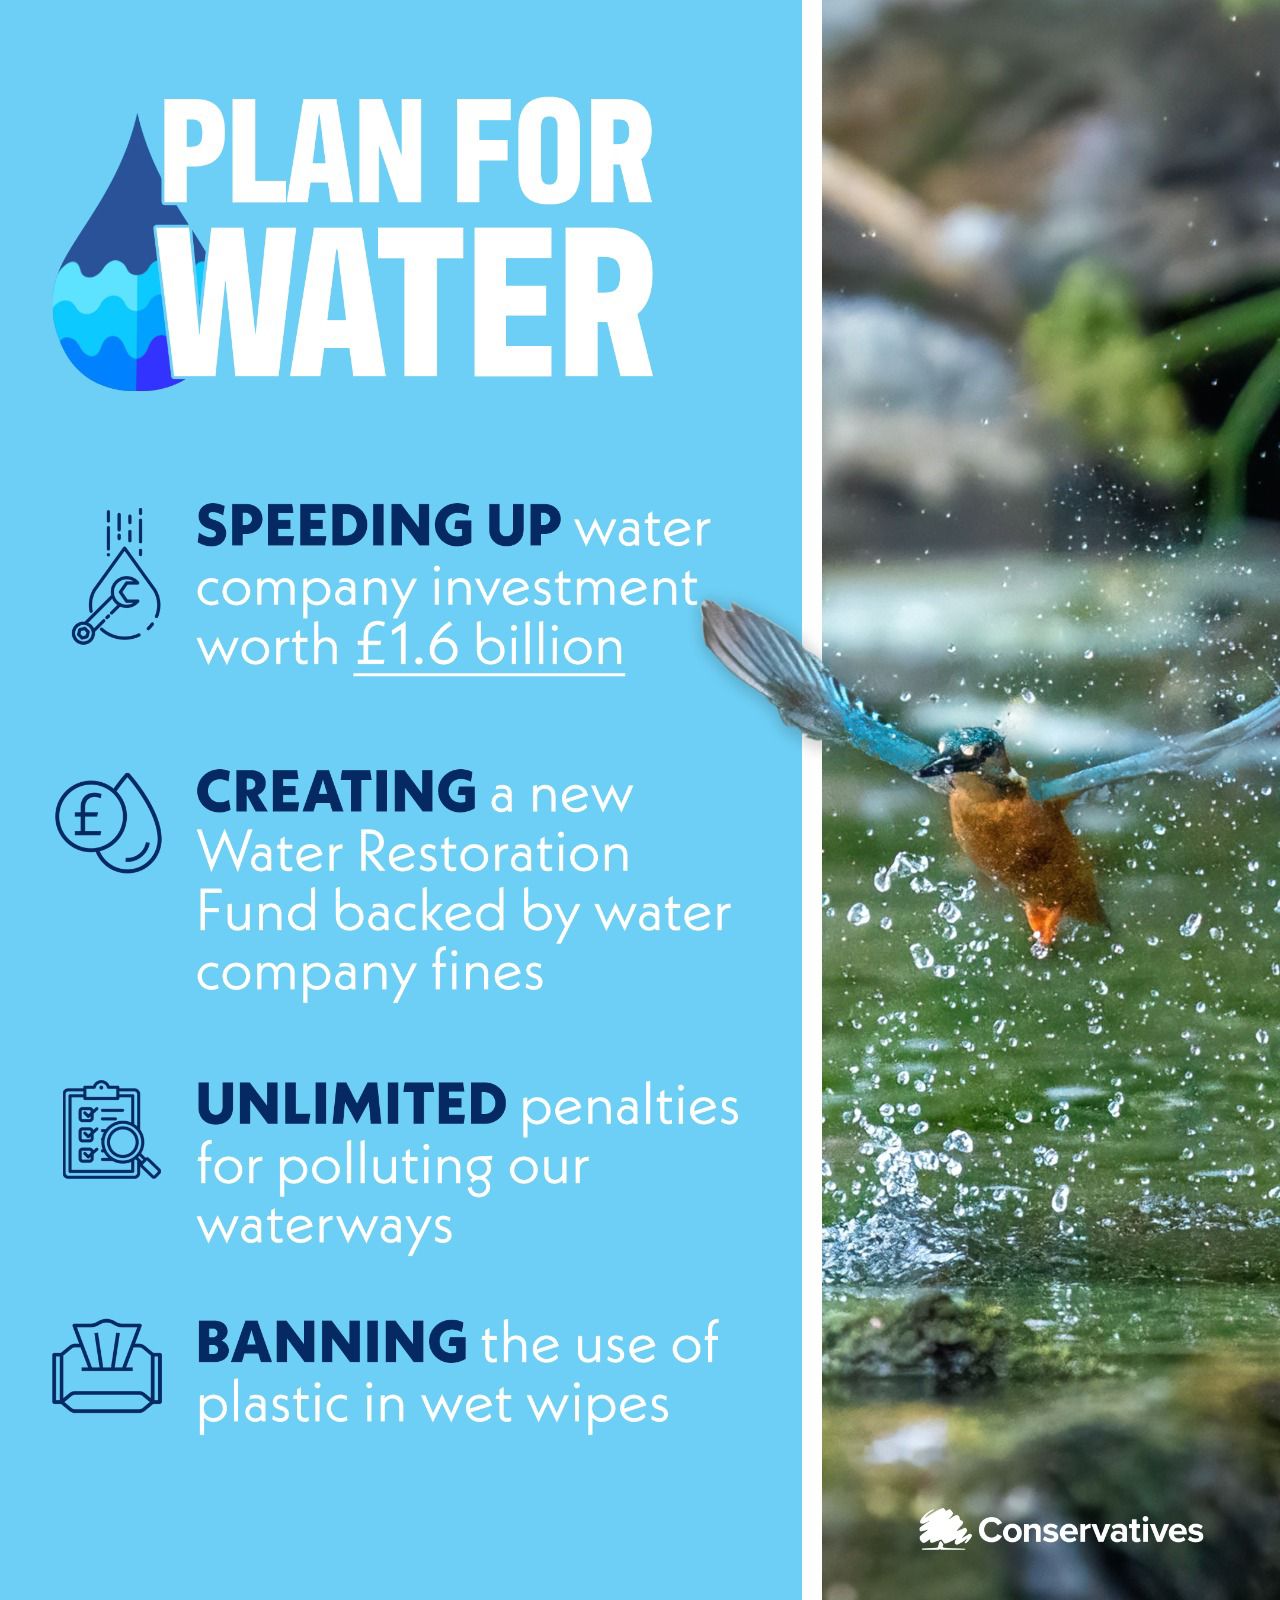 We are Taking Action to Protect our Waterways